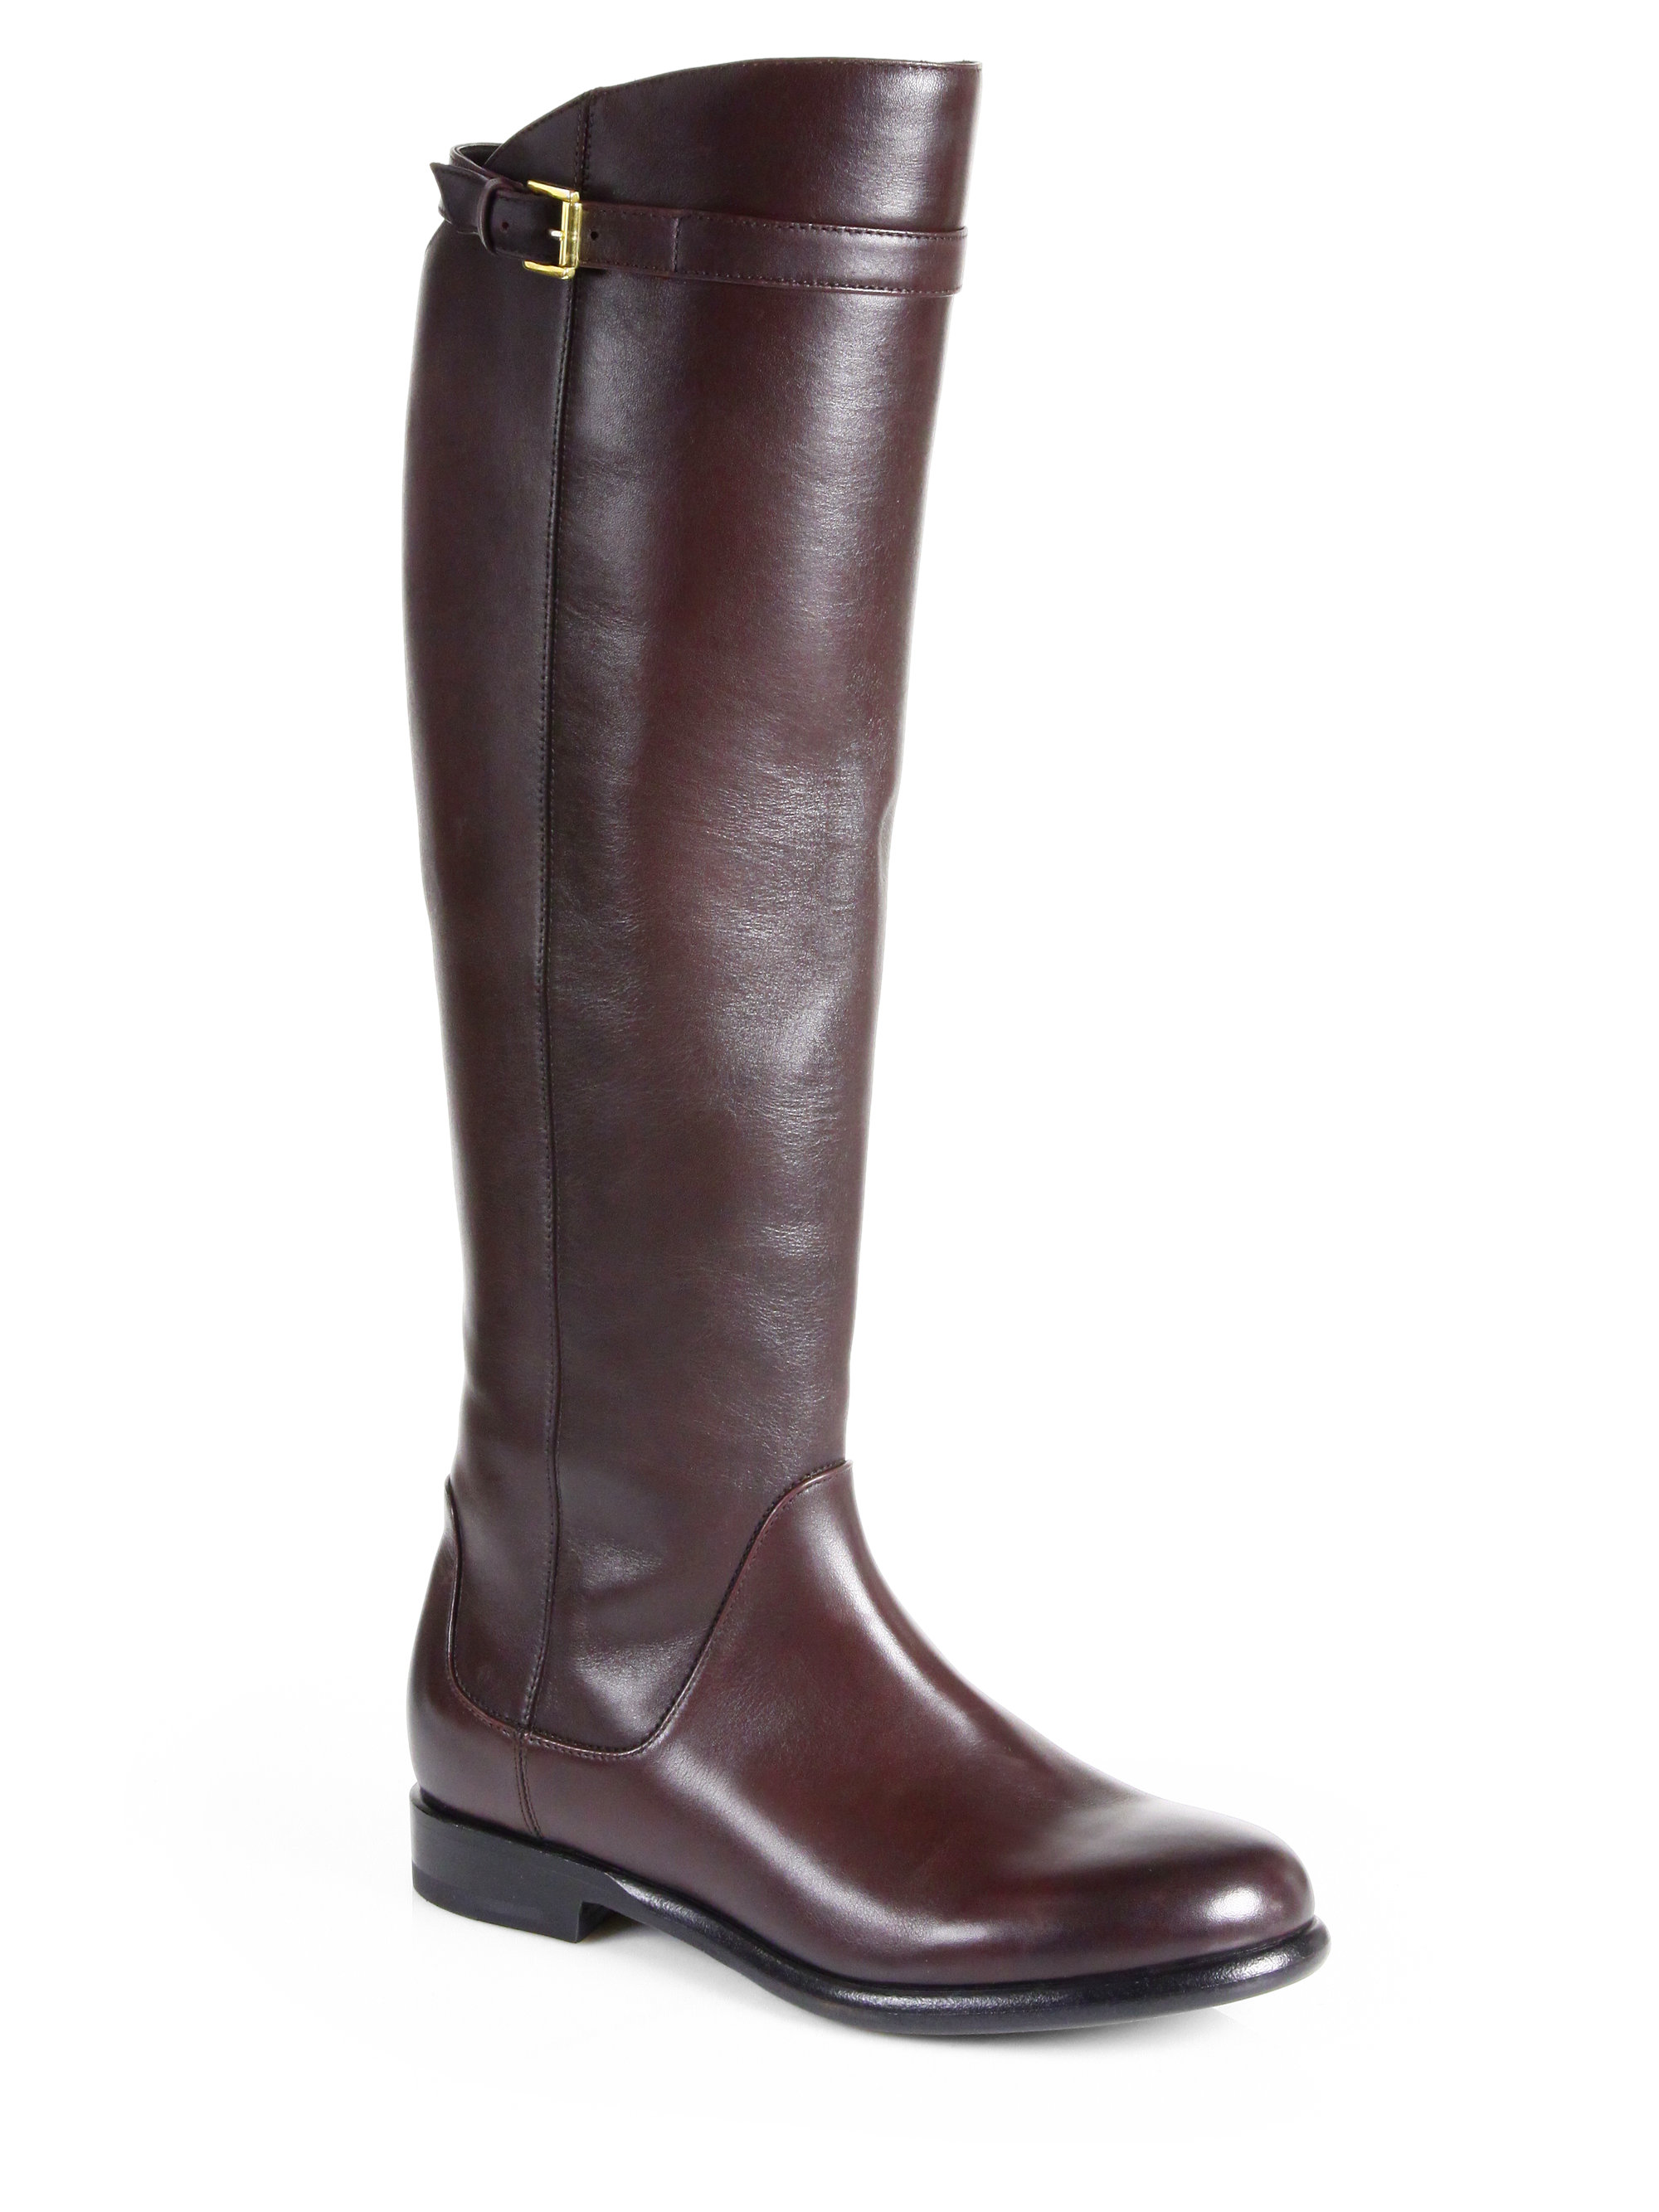 Giorgio Armani Leather Knee-high Riding Boots in Red (BURGUNDY) | Lyst